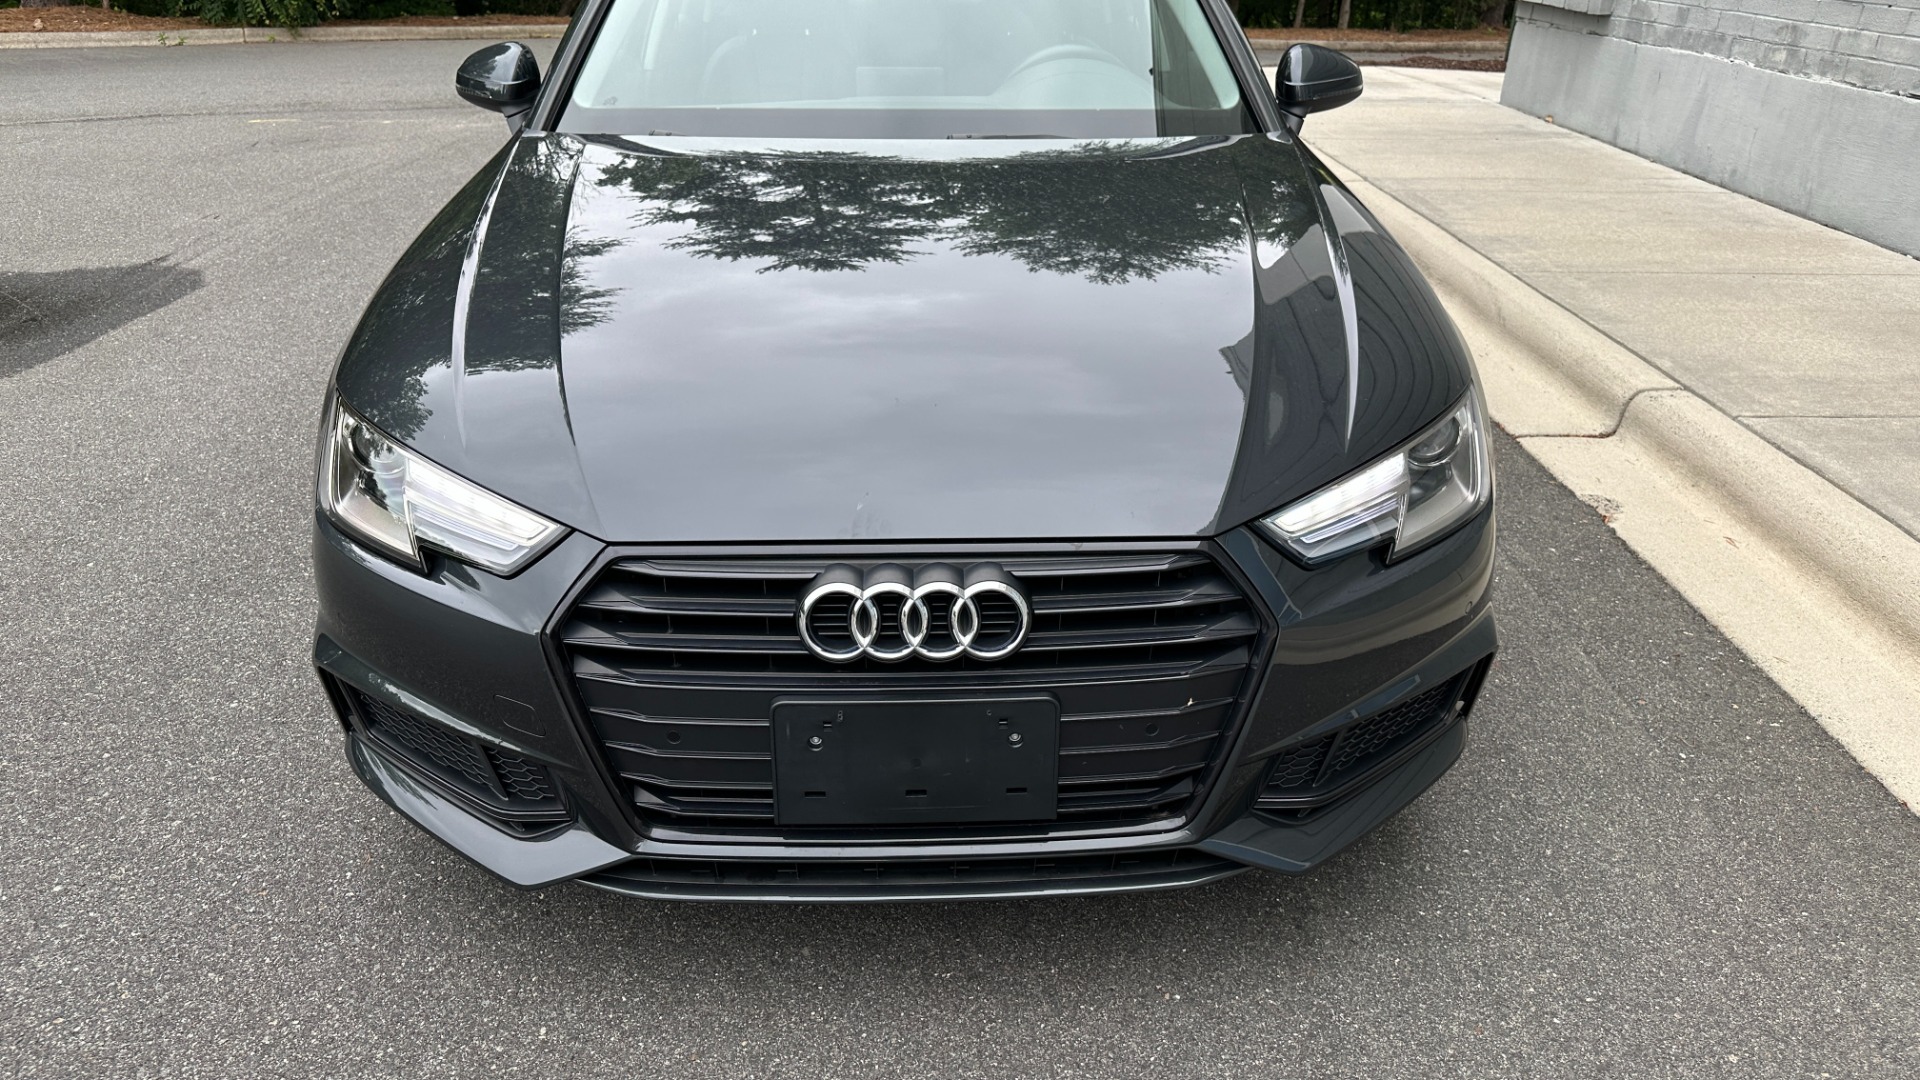 Used 2019 Audi A4 PREMIUM / AUDI BEAM RINGS / AUDI GUARD / LEATHER for sale $28,250 at Formula Imports in Charlotte NC 28227 8